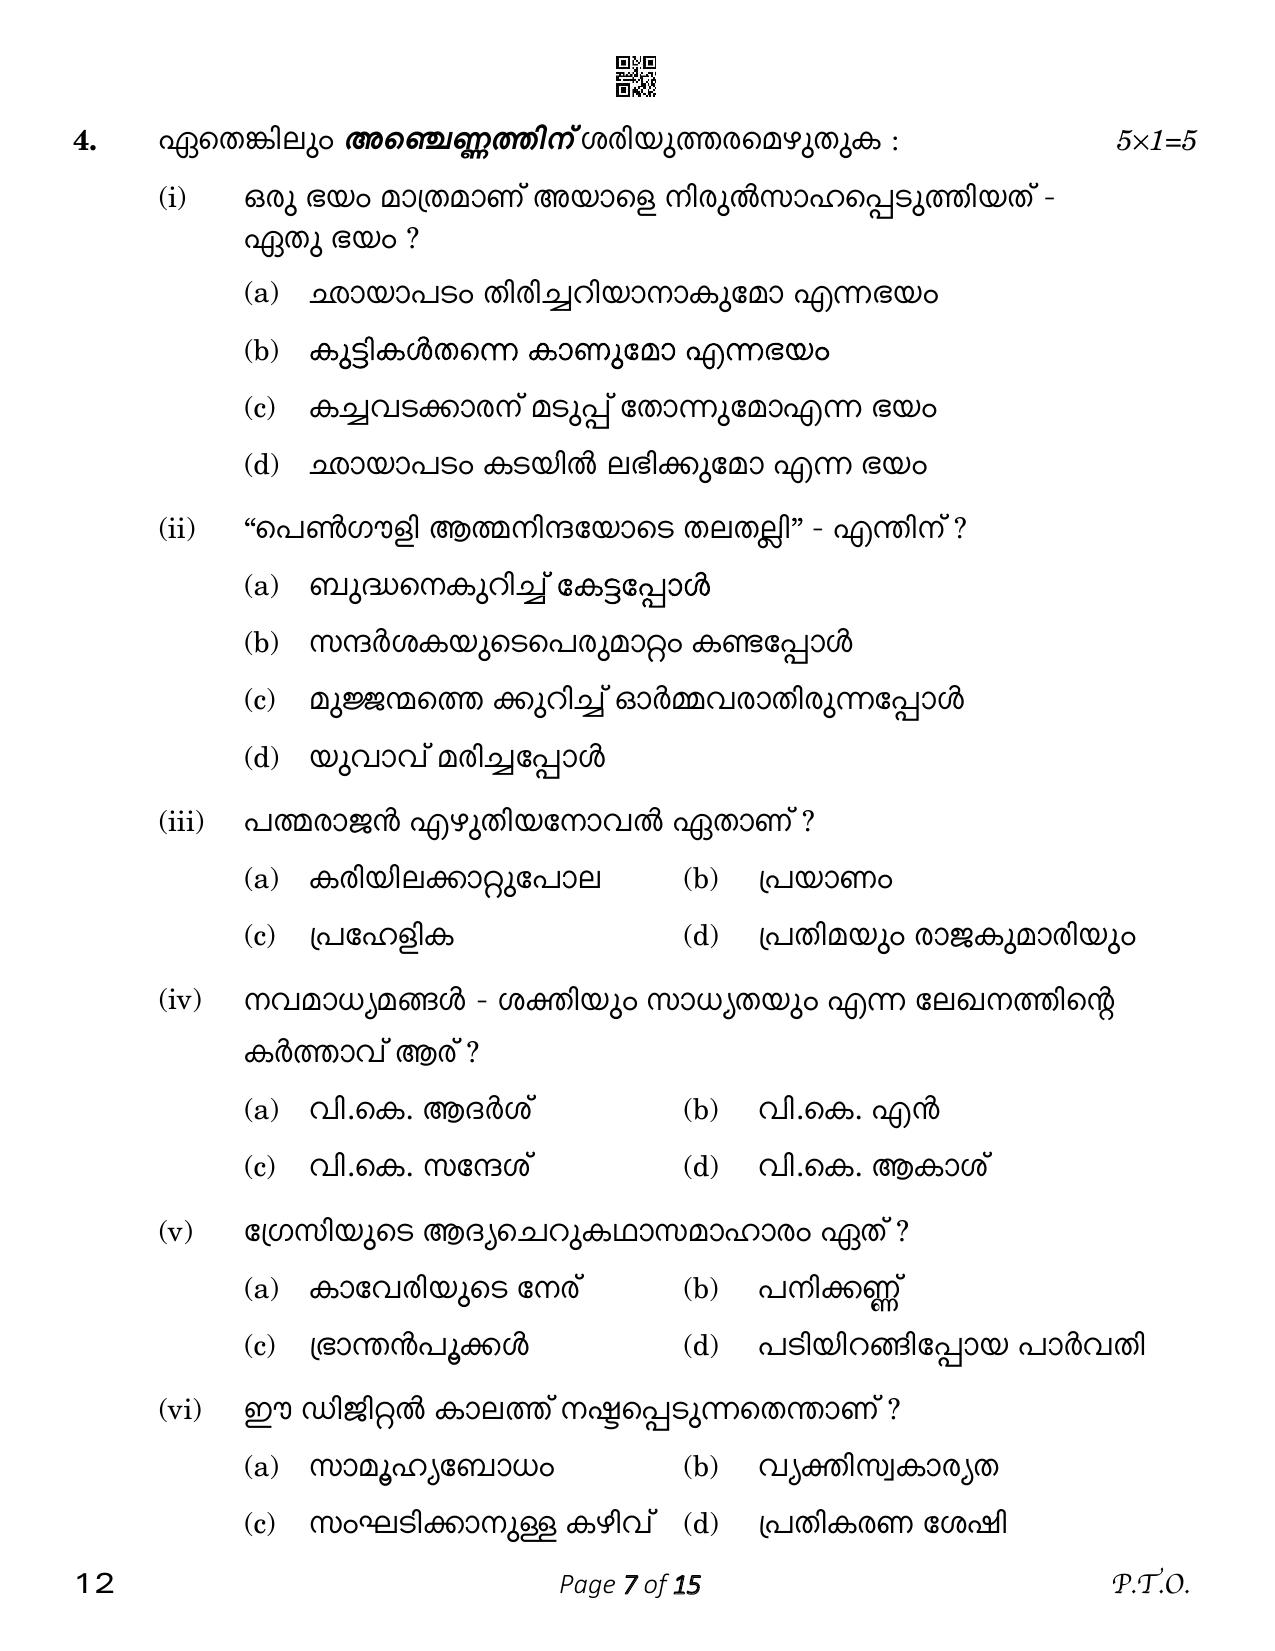 CBSE Class 12 Malayalam (Compartment) 2023 Question Paper - Page 7